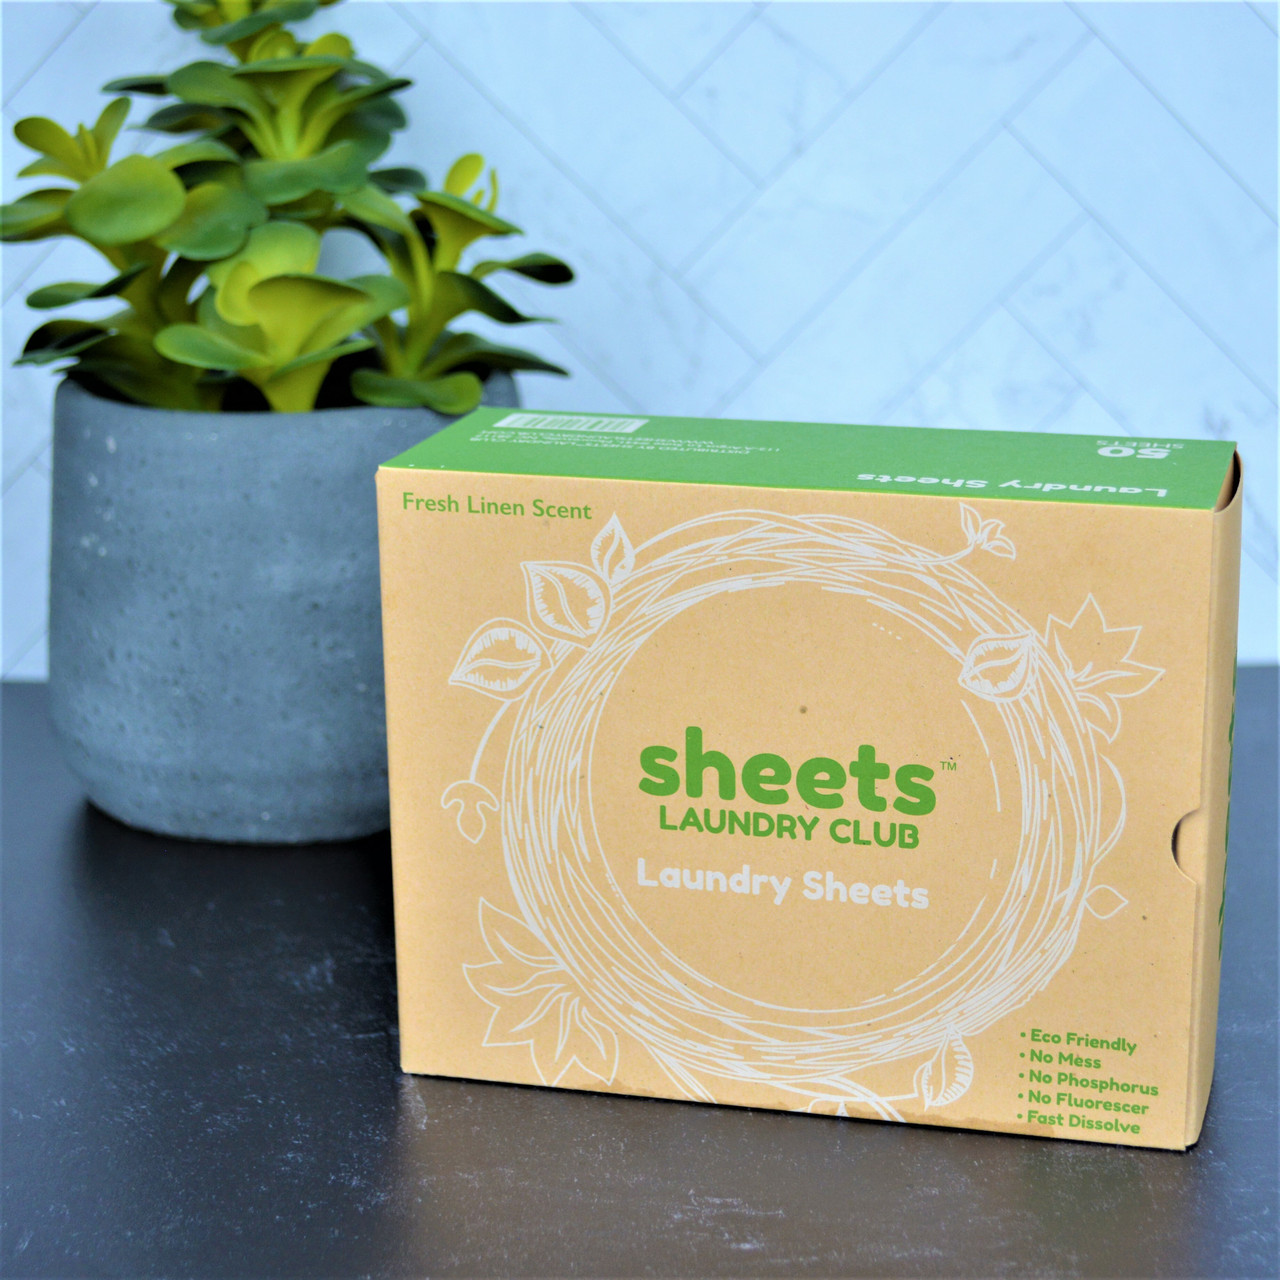 Fresh Linen Laundry Detergent -Sheets - Old Town Soap Co.